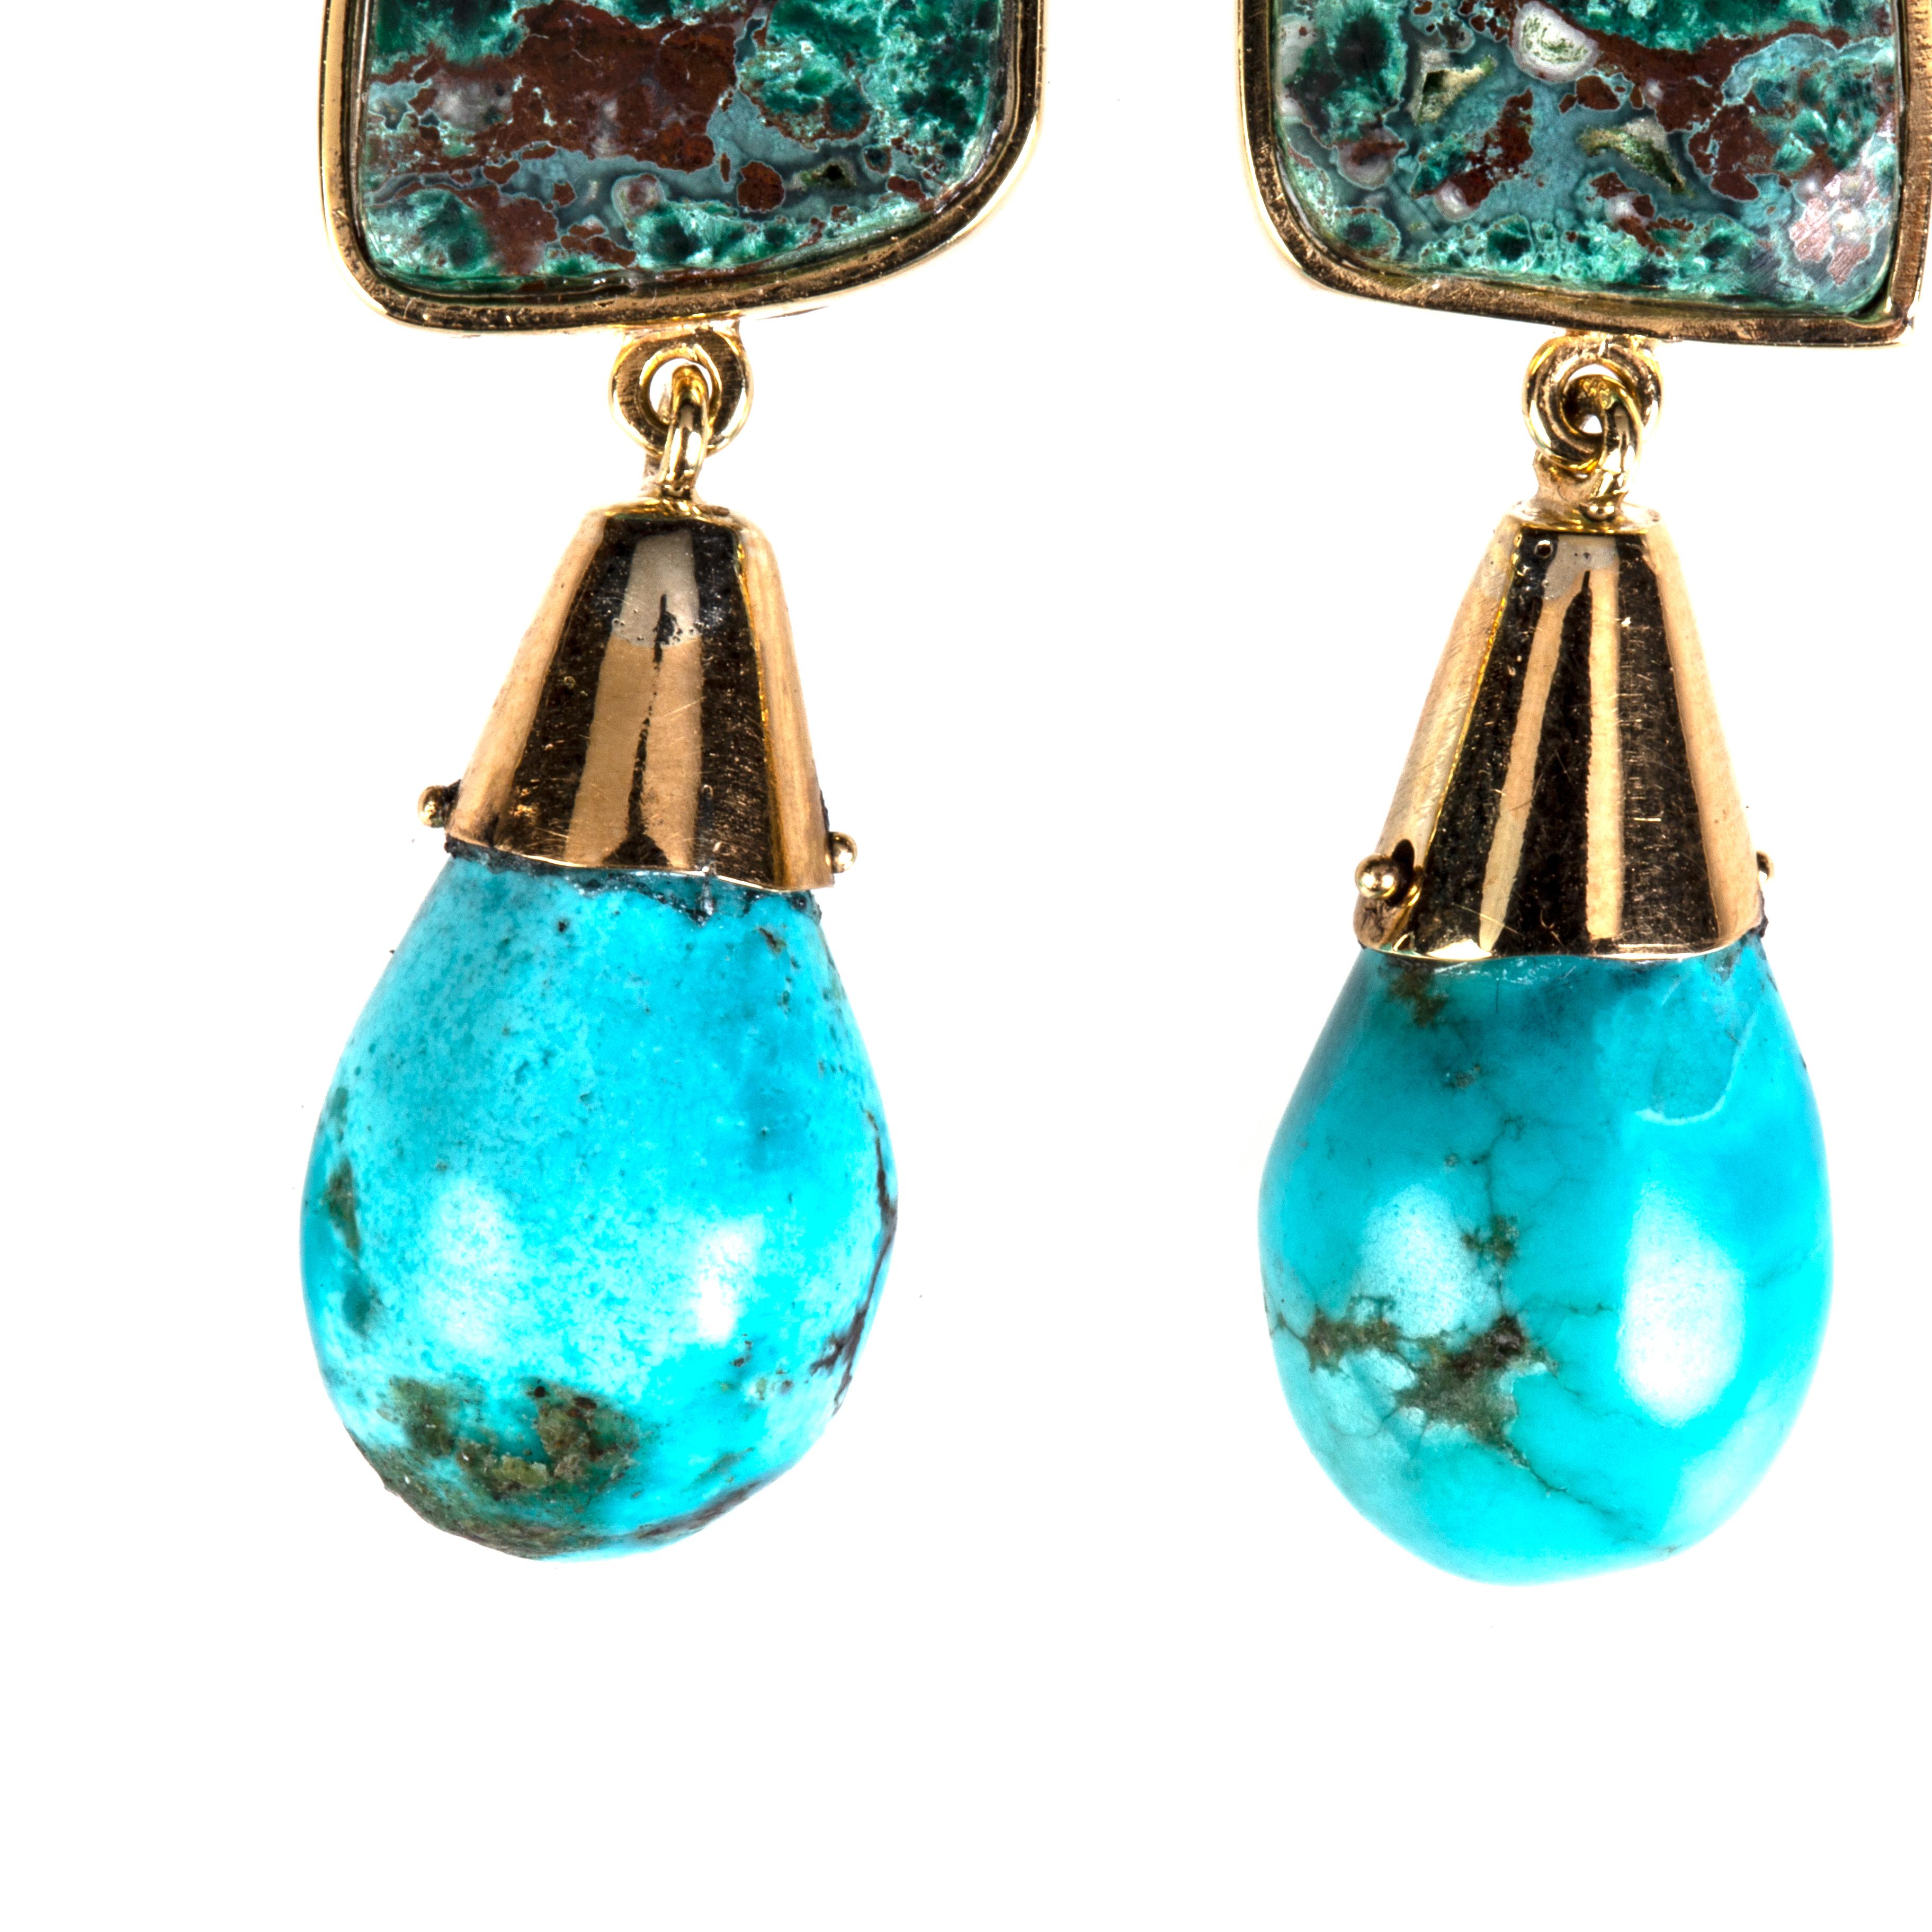 Earrings green blu malachite irregular stone, turquoise drop, 18 k gold 6,40 gr.
All Giulia Colussi jewelry is new and has never been previously owned or worn. Each item will arrive at your door beautifully gift wrapped in our boxes, put inside an